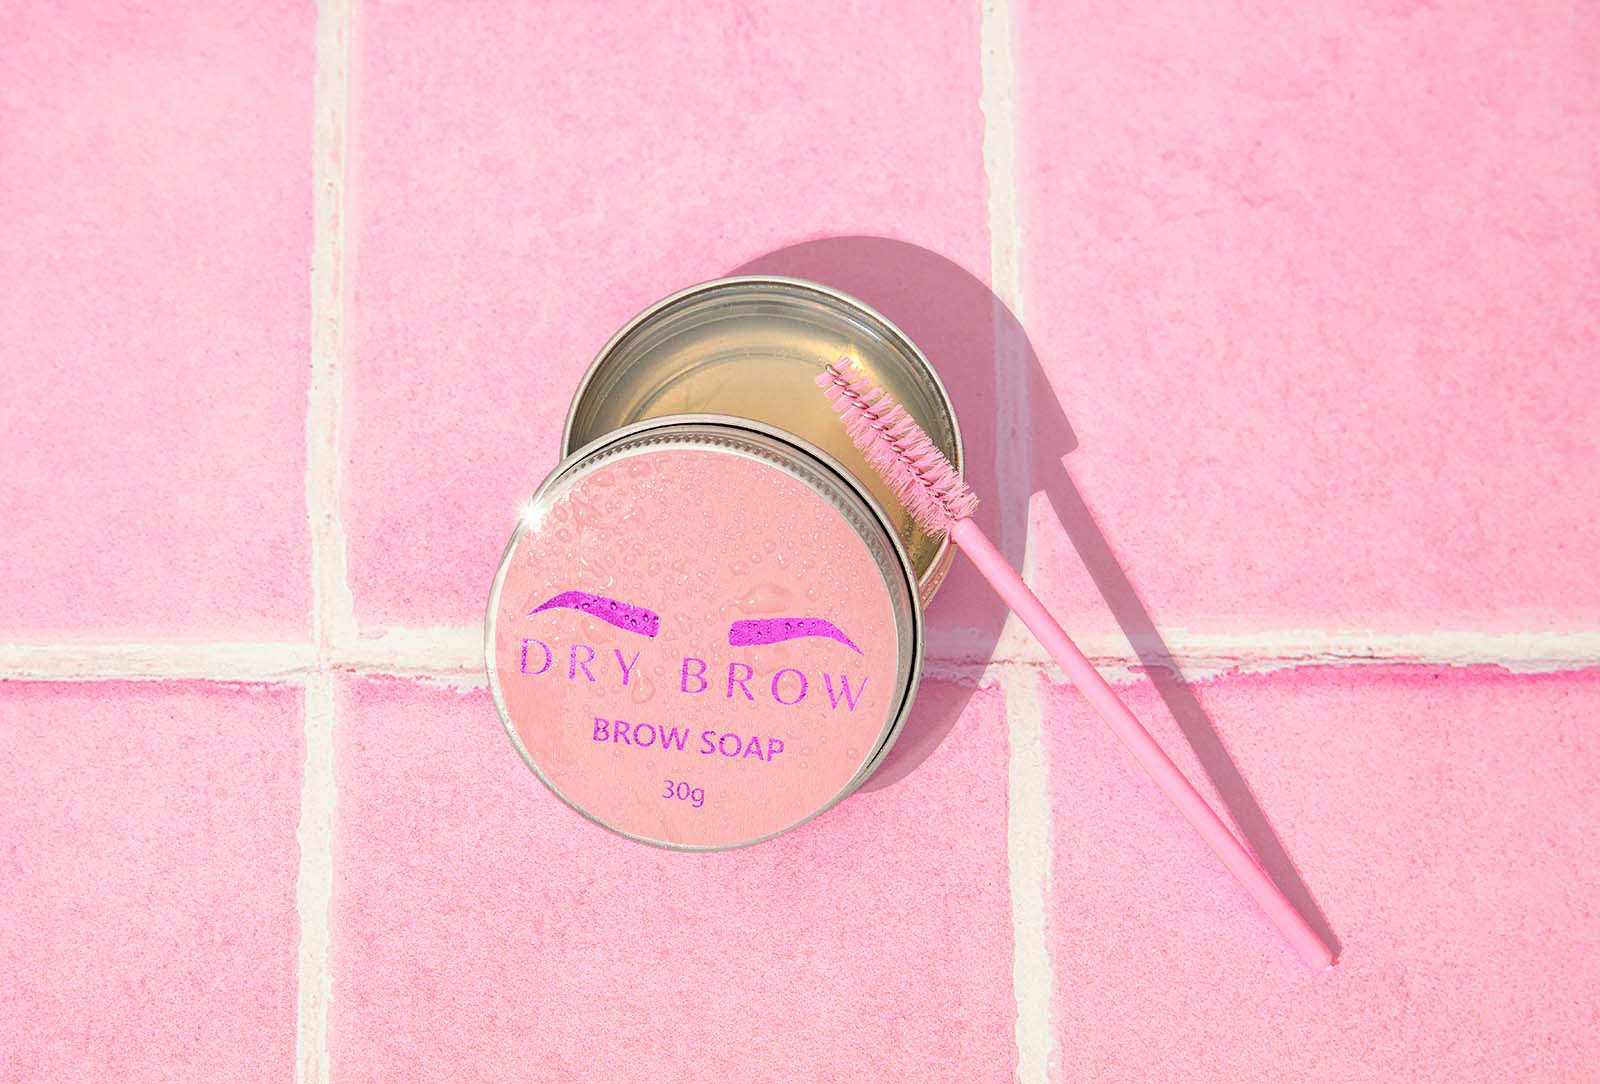 PInk and Orange Proudct photos for skincare brand dry brow. Pink aesthetic image styled by product photographer colourpop studio